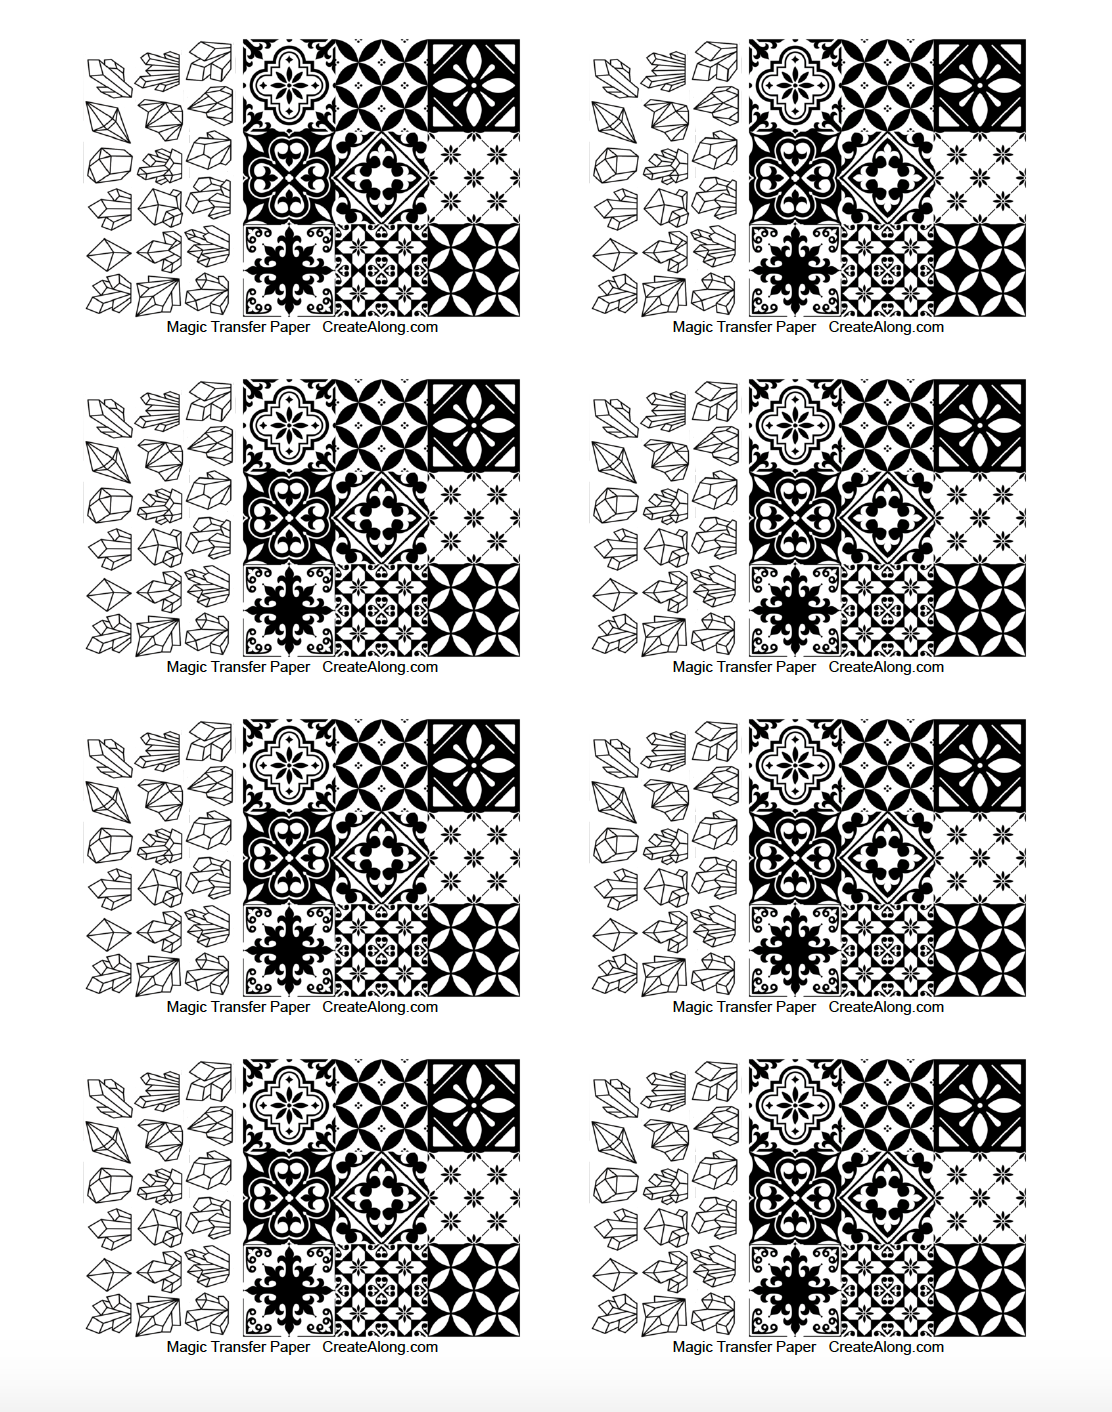 Digital Spanish Tiles & Crystals Transfer PDF for creating images on raw polymer clay and for use with Magic Transfer Paper